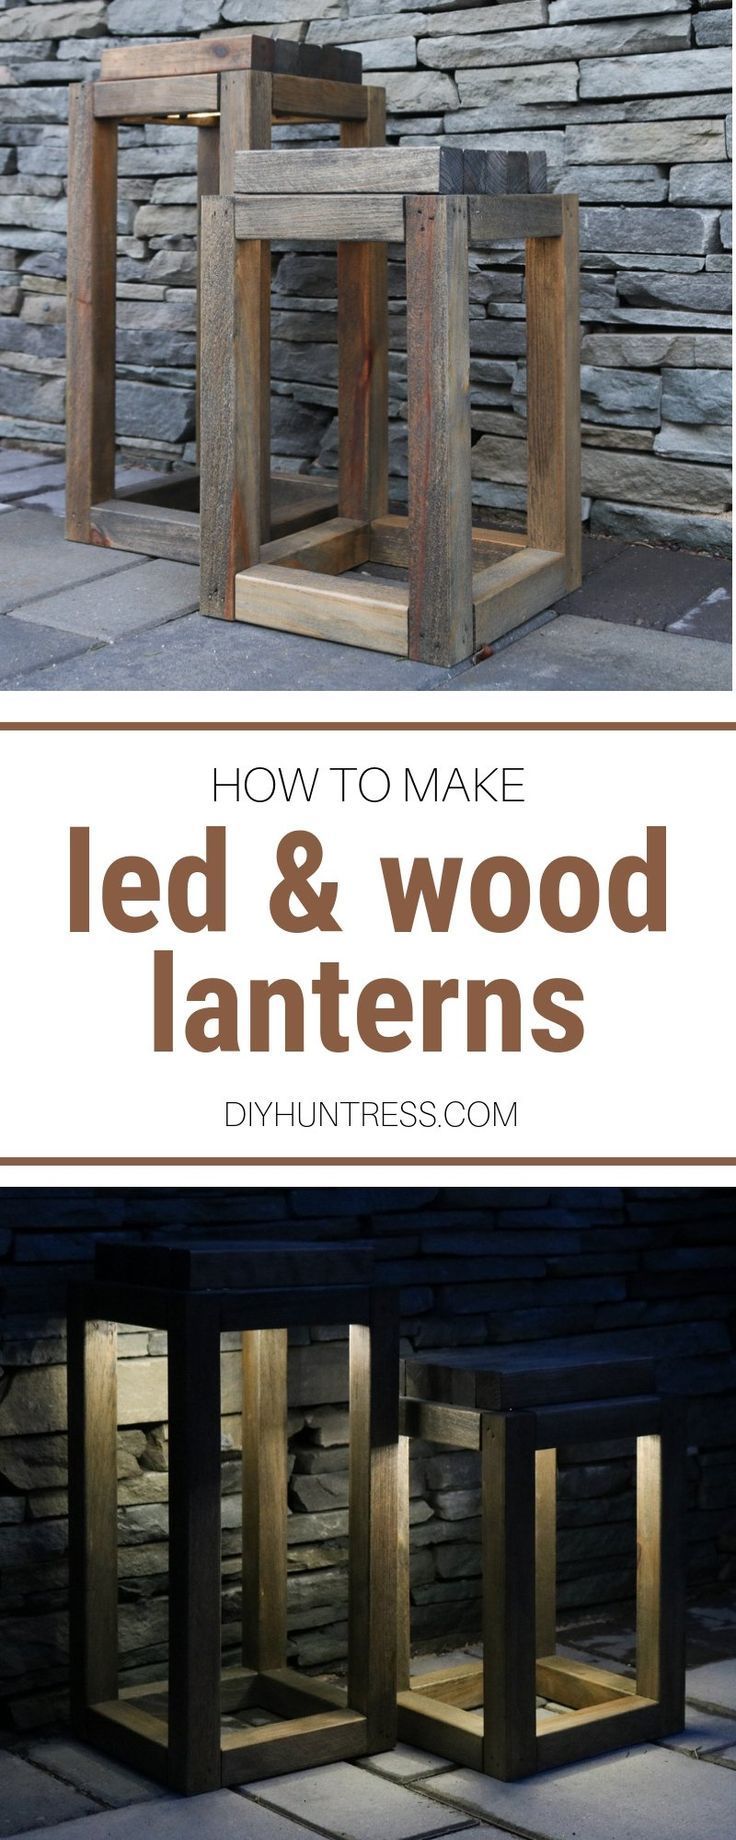 DIY Wooden LED Lanterns - DIY Huntress -   17 diy projects Wooden awesome ideas